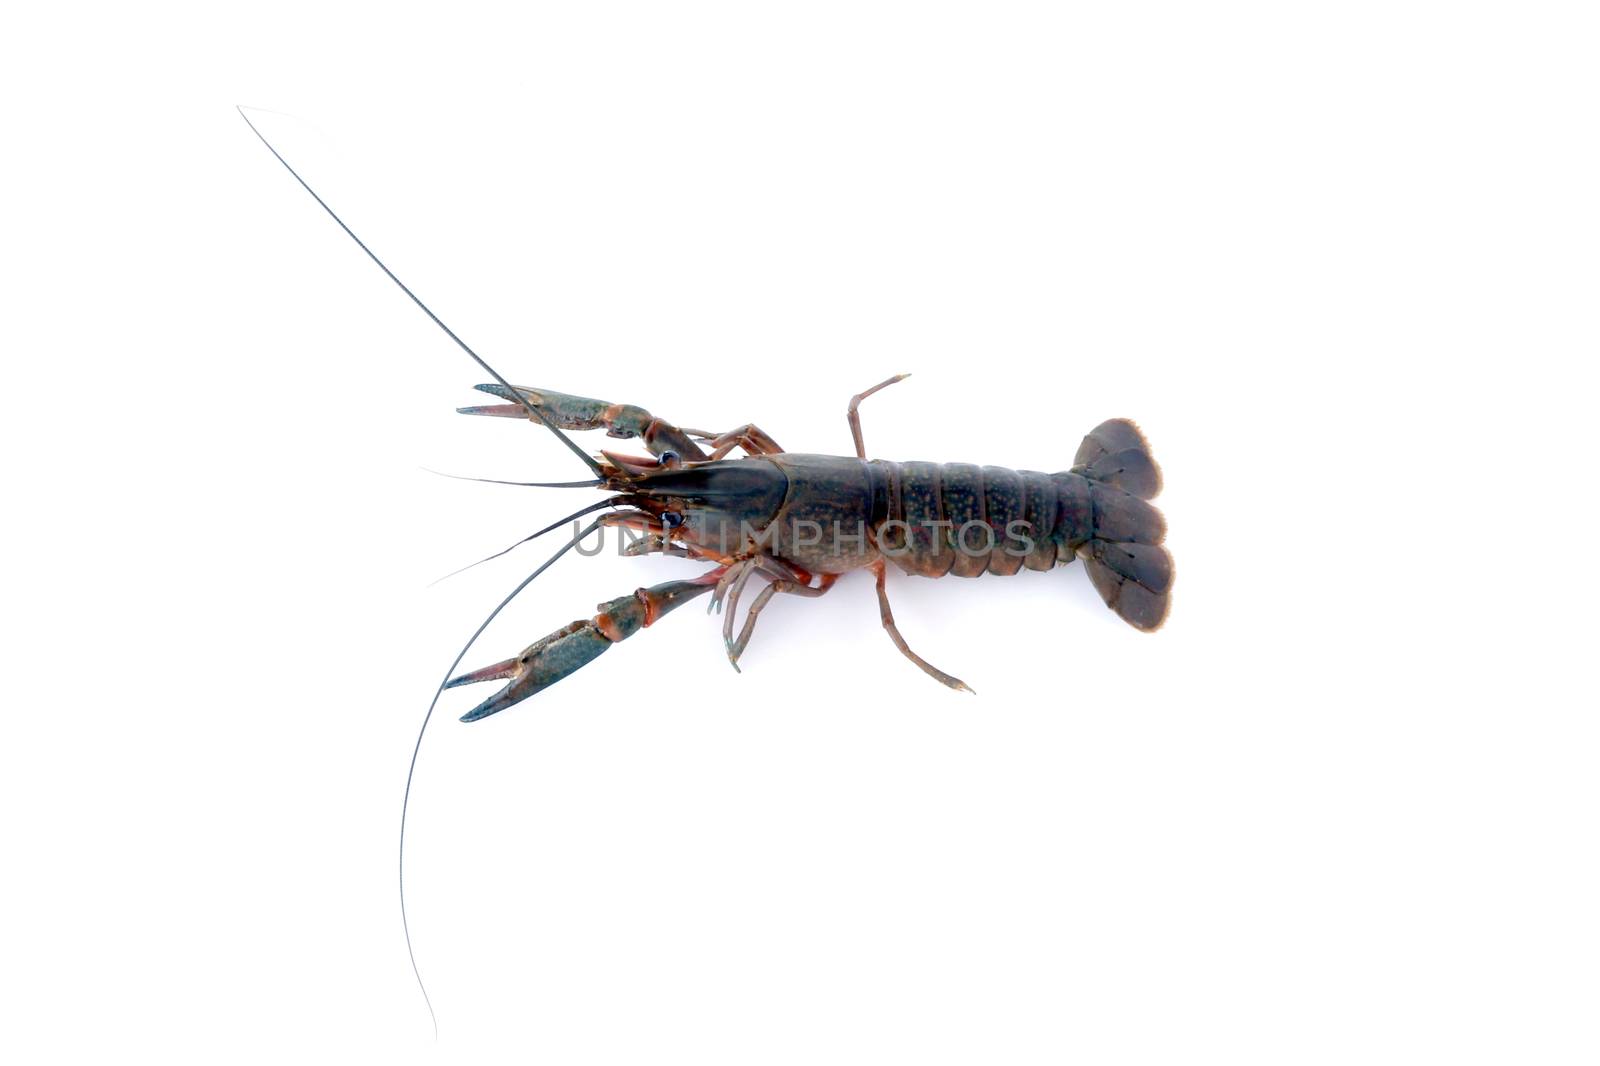 Image of lobster isolated on white background.